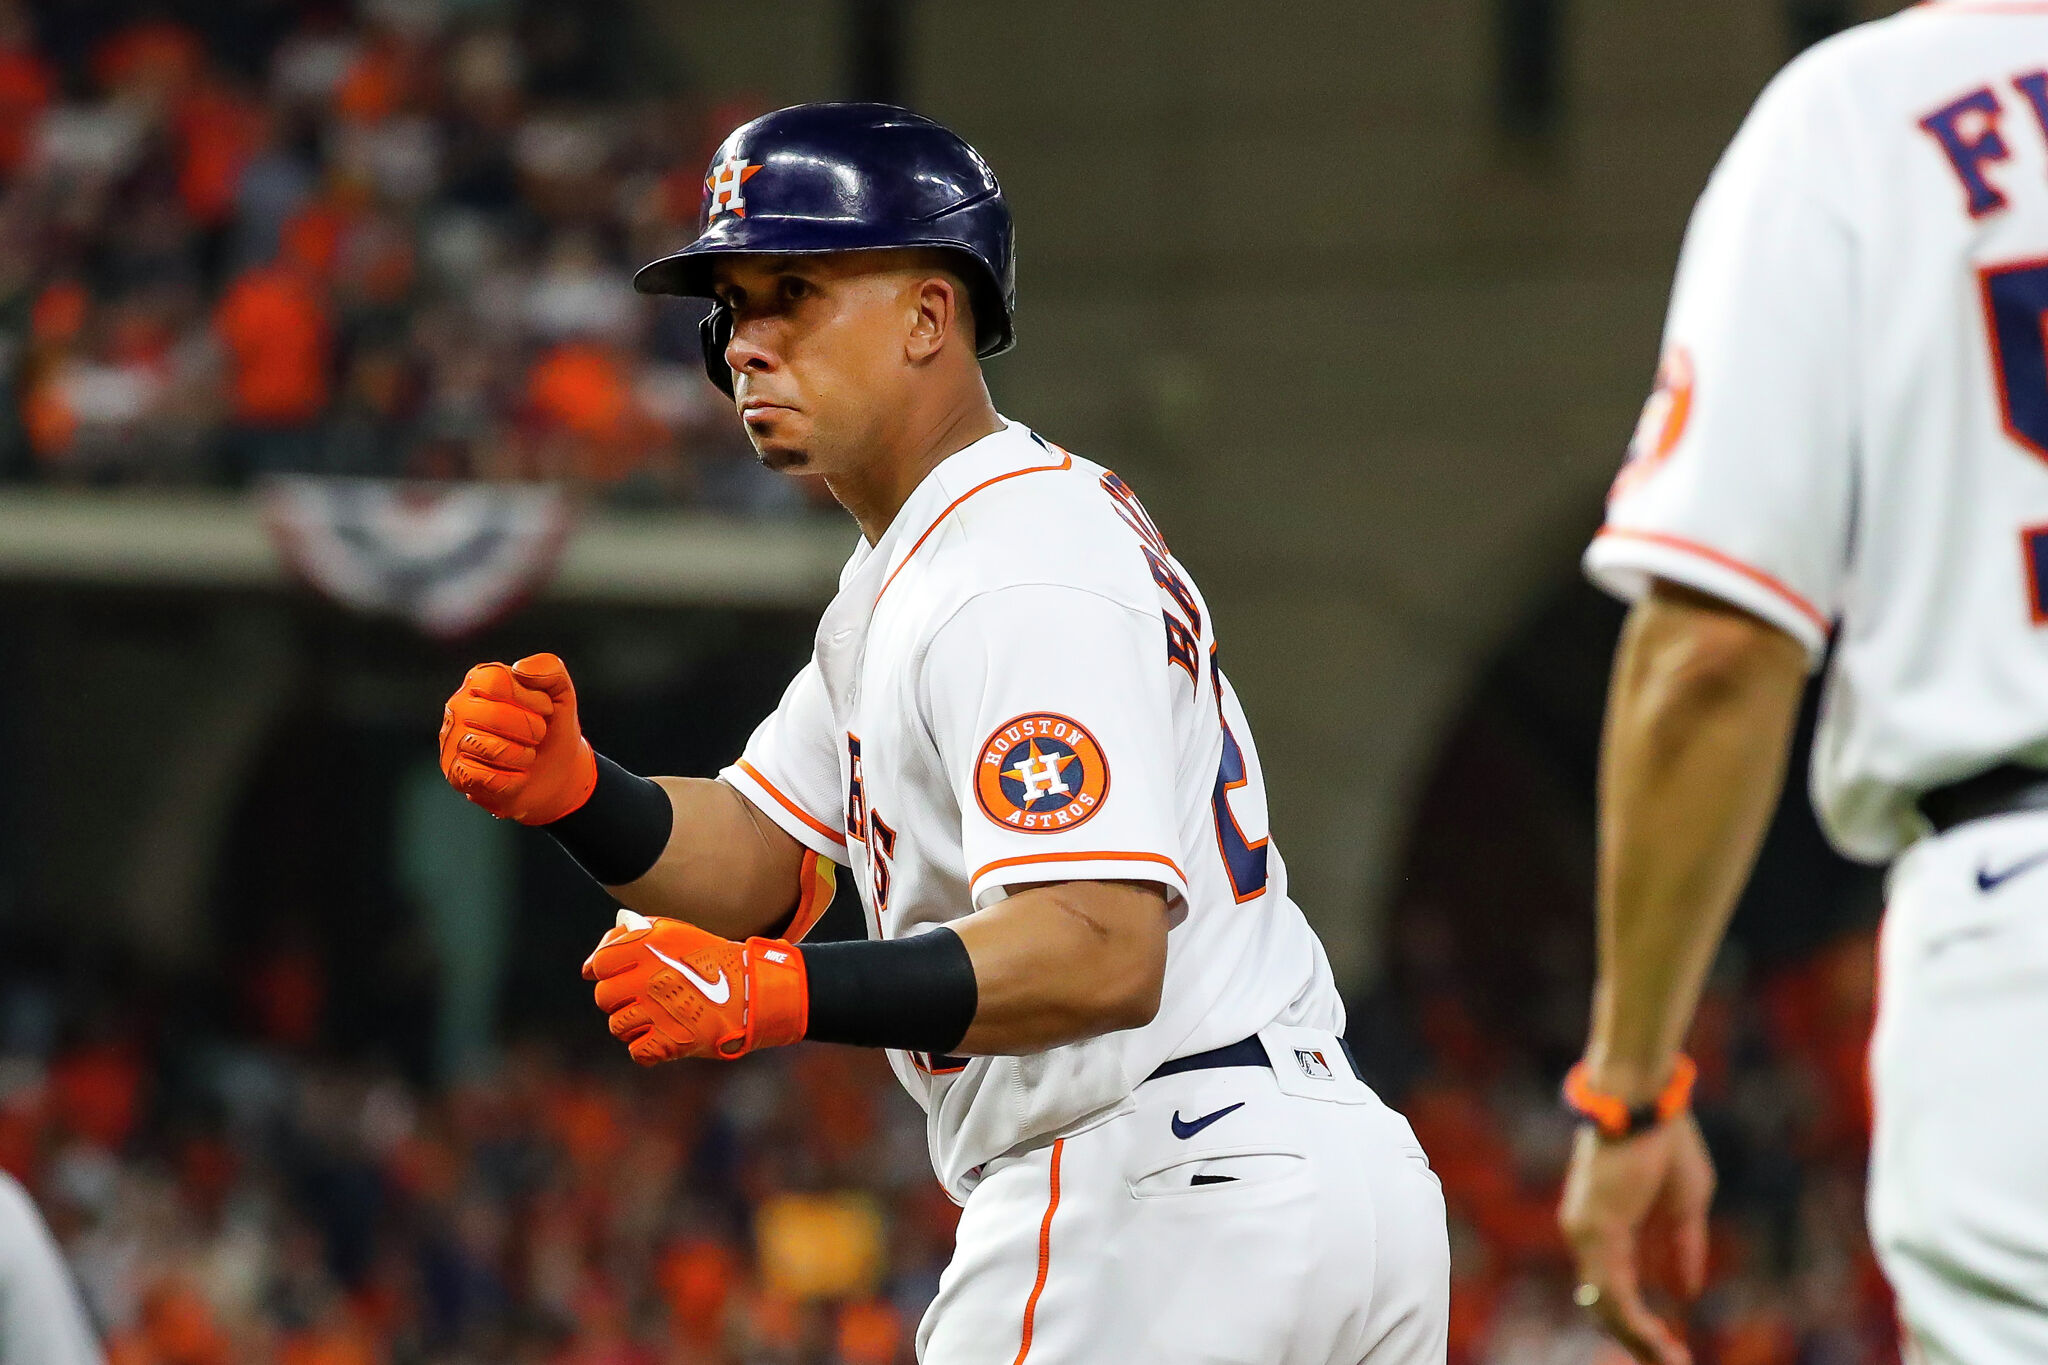 MLB free agency: Astros get better by not outspending rivals